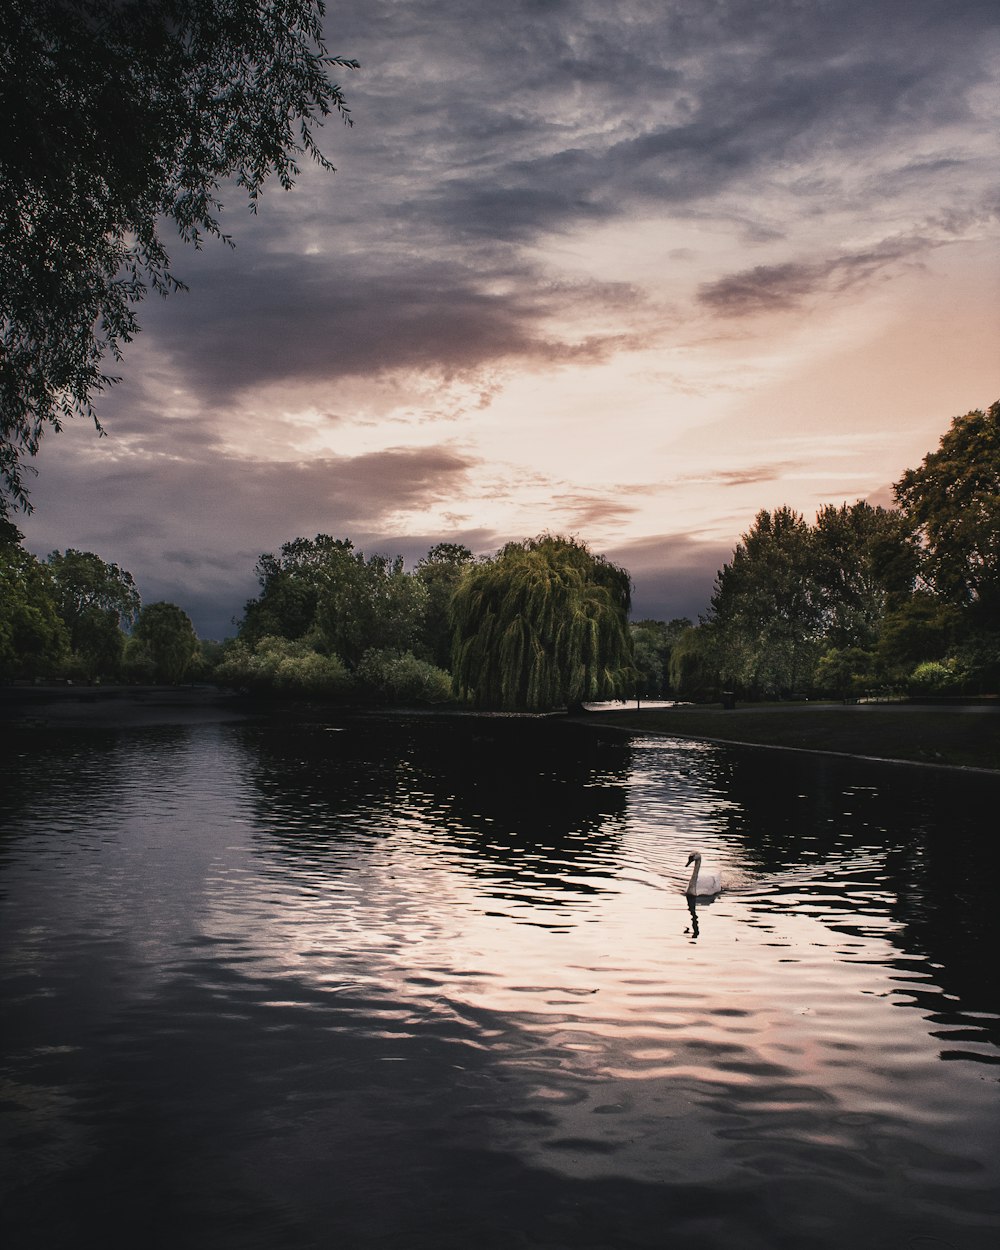 swan on body of water surrounded by trees under cloudy sky